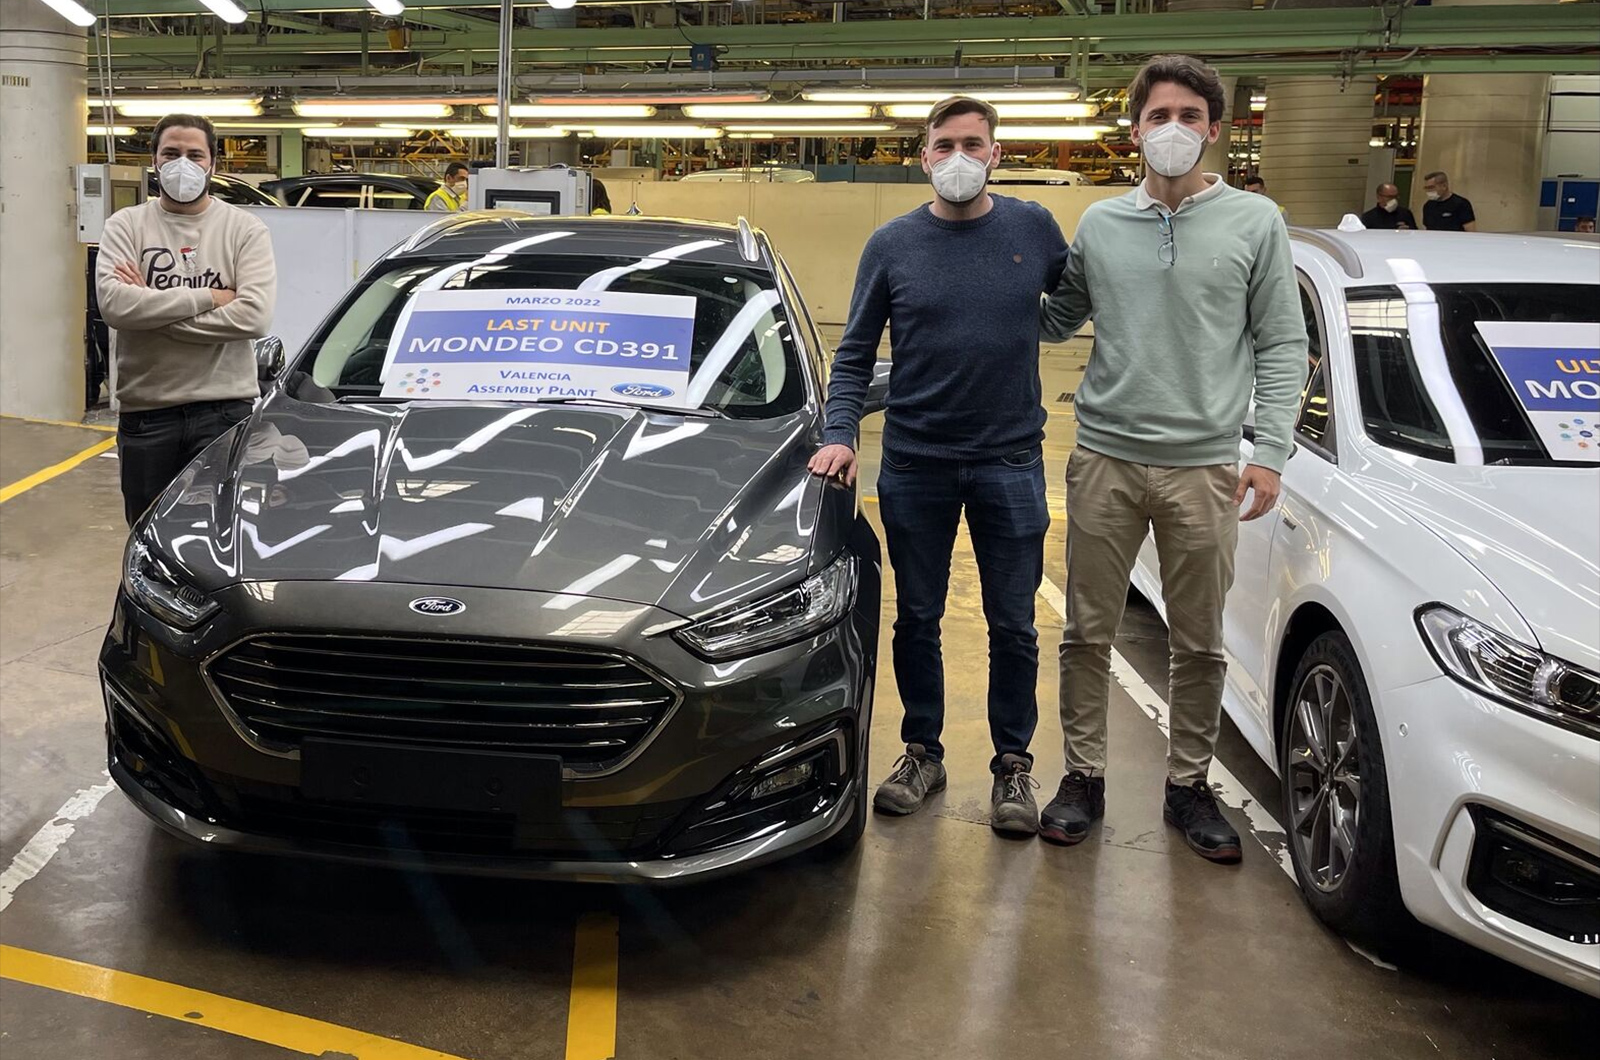 <p>The final Mondeo rolled off the line in Valencia on Monday 4<sup>th</sup> April 2022. Ford production engineer Federico Ertl posted a picture on LinkedIn (above), with a message in Spanish, translated as: “Yesterday we said farewell to the Ford Mondeo.  The truth is that it is very sad to think that these have been the last two vehicles produced and that I will no longer see them at the plant. And if I feel sorry for myself, I can't even imagine what it’s like for those who saw it born!”</p><p>Around <strong>5 million </strong>Mondeos were sold in Europe in total since launch. The Spanish factory continues to build cars like the Kuga SUV. But this isn’t quite the end of the Ford saloon story…</p>